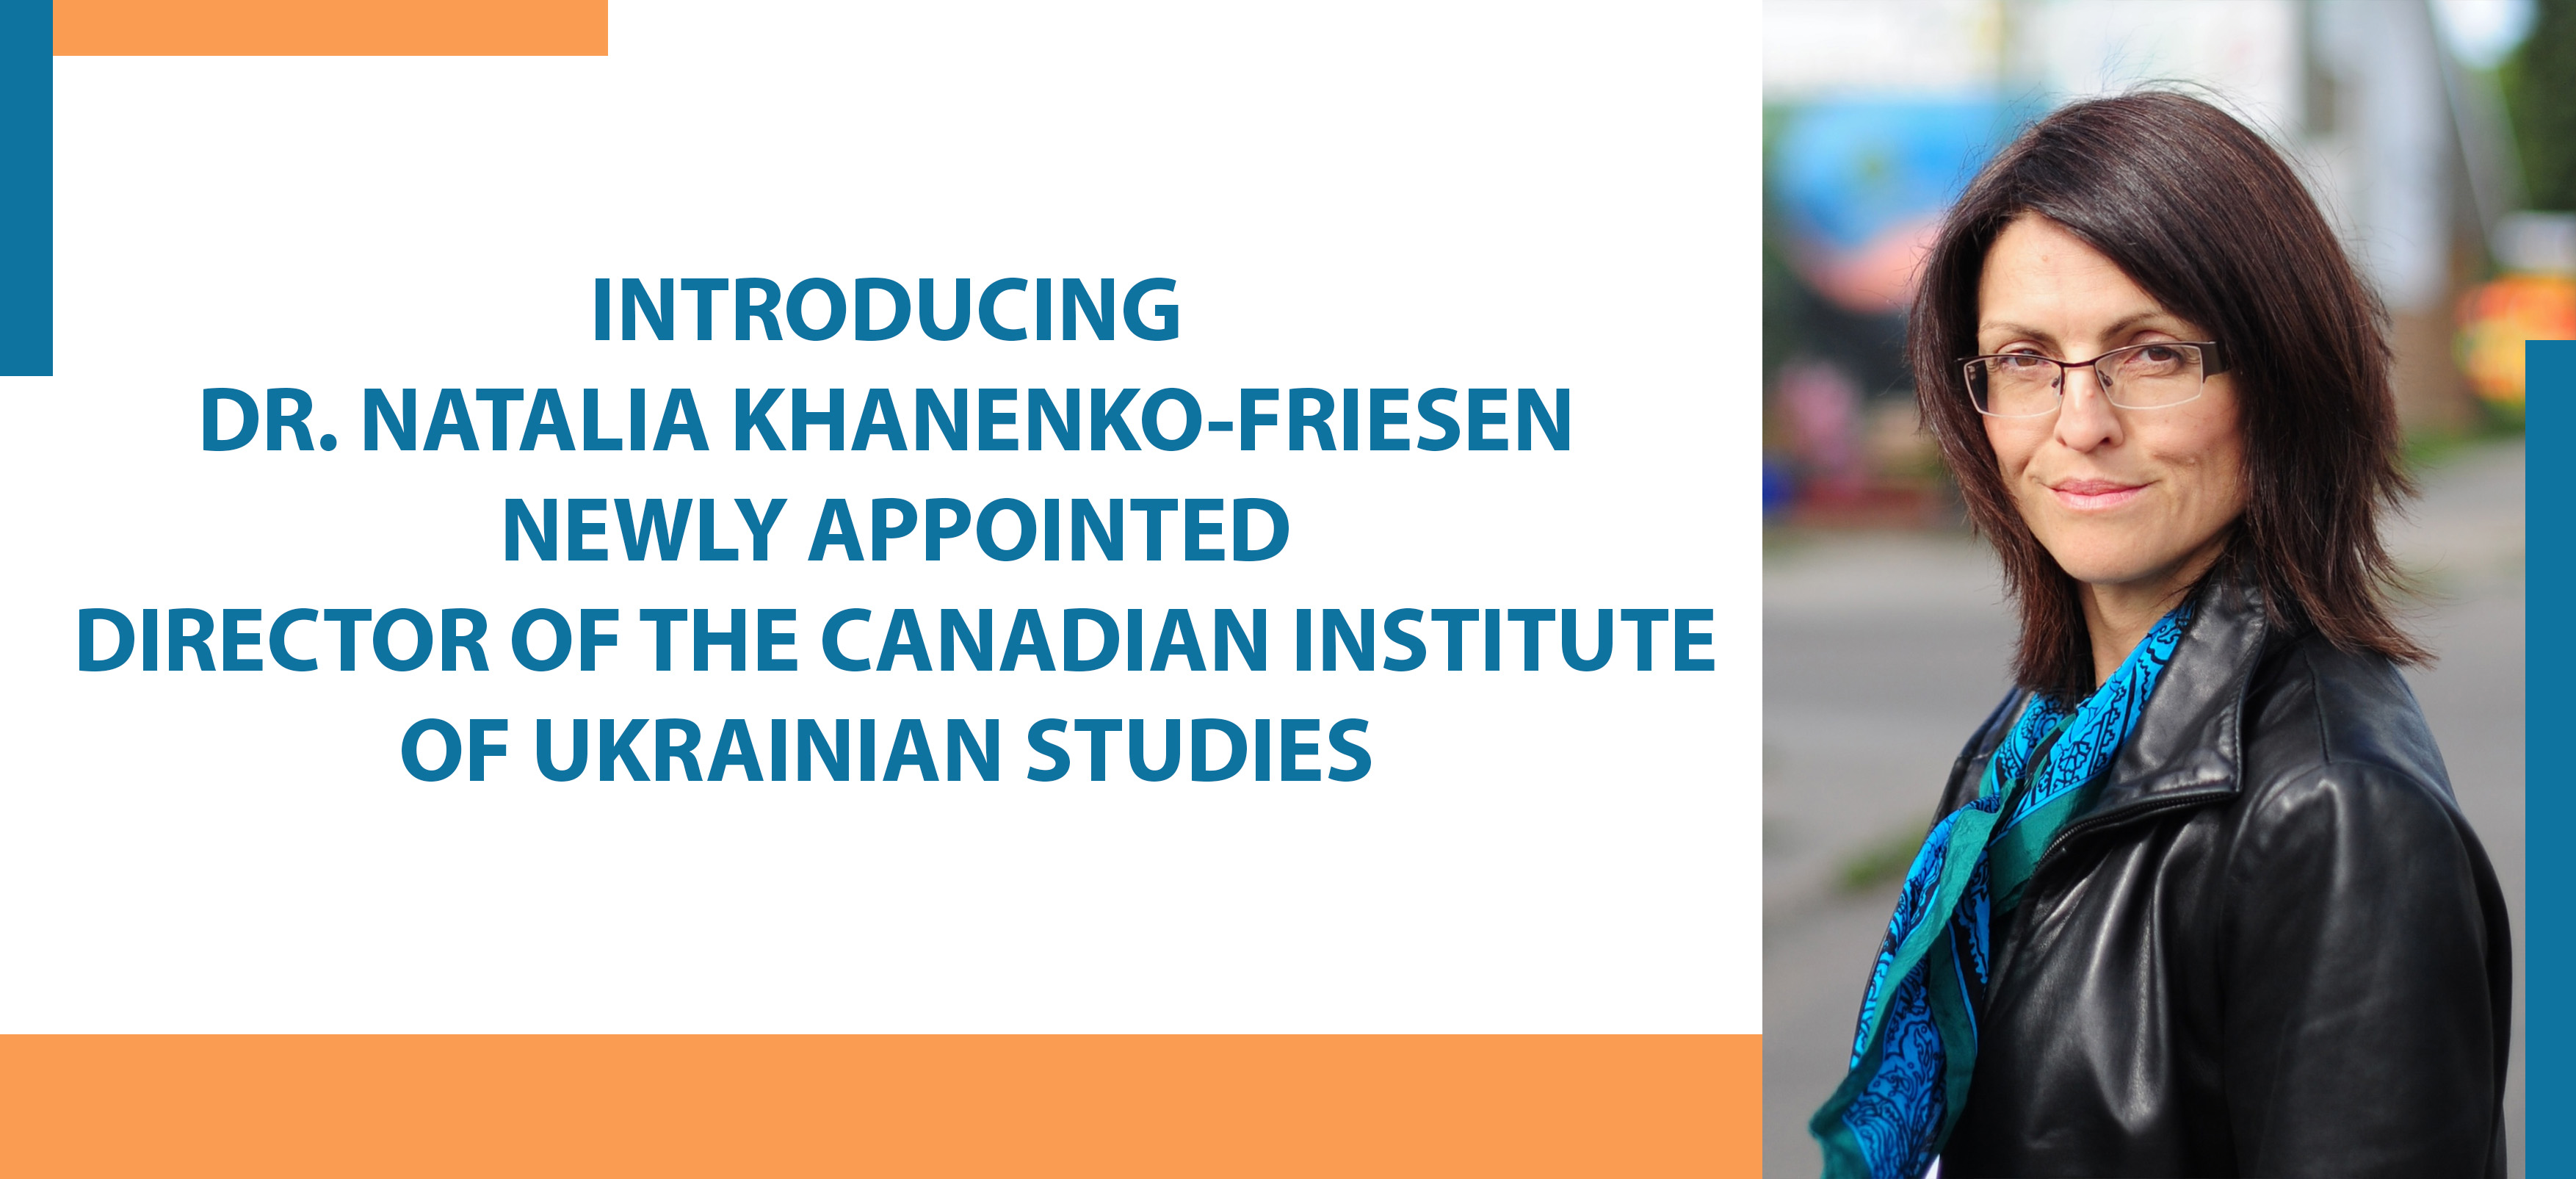 introducing-dr.-natalia-khanenko-friesen-newly-appointed-director-of-the-canadian-institute-of-ukrainian-studies.jpg